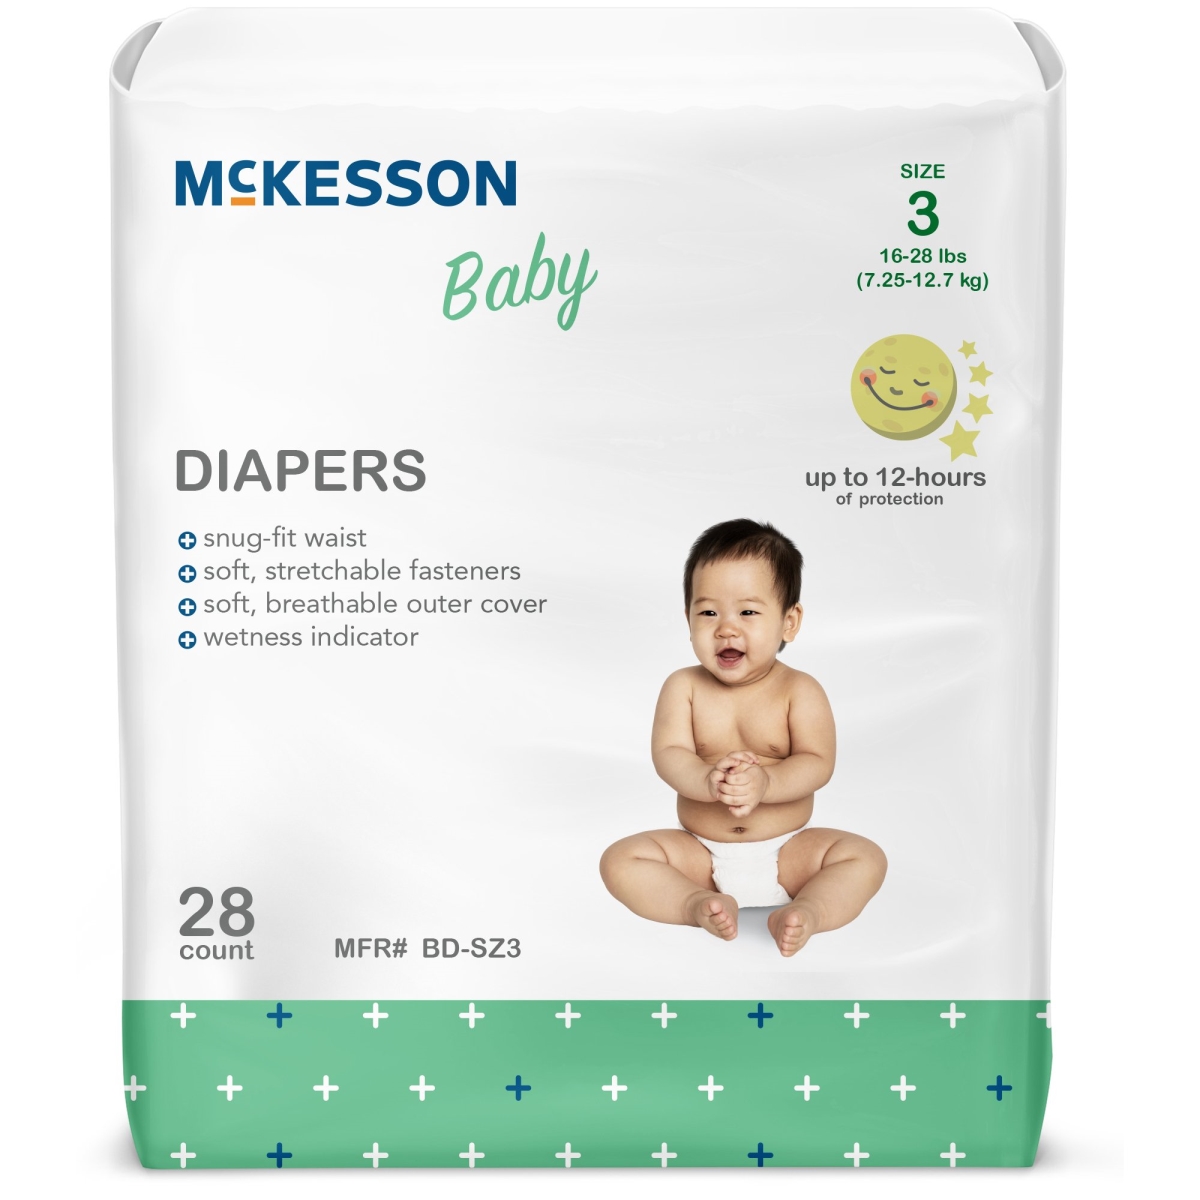 Picture of Drylock Technologies 1144476-BG 16-28 lbs Baby Diaper - Size 3 - 4 per Case - Pack of 28